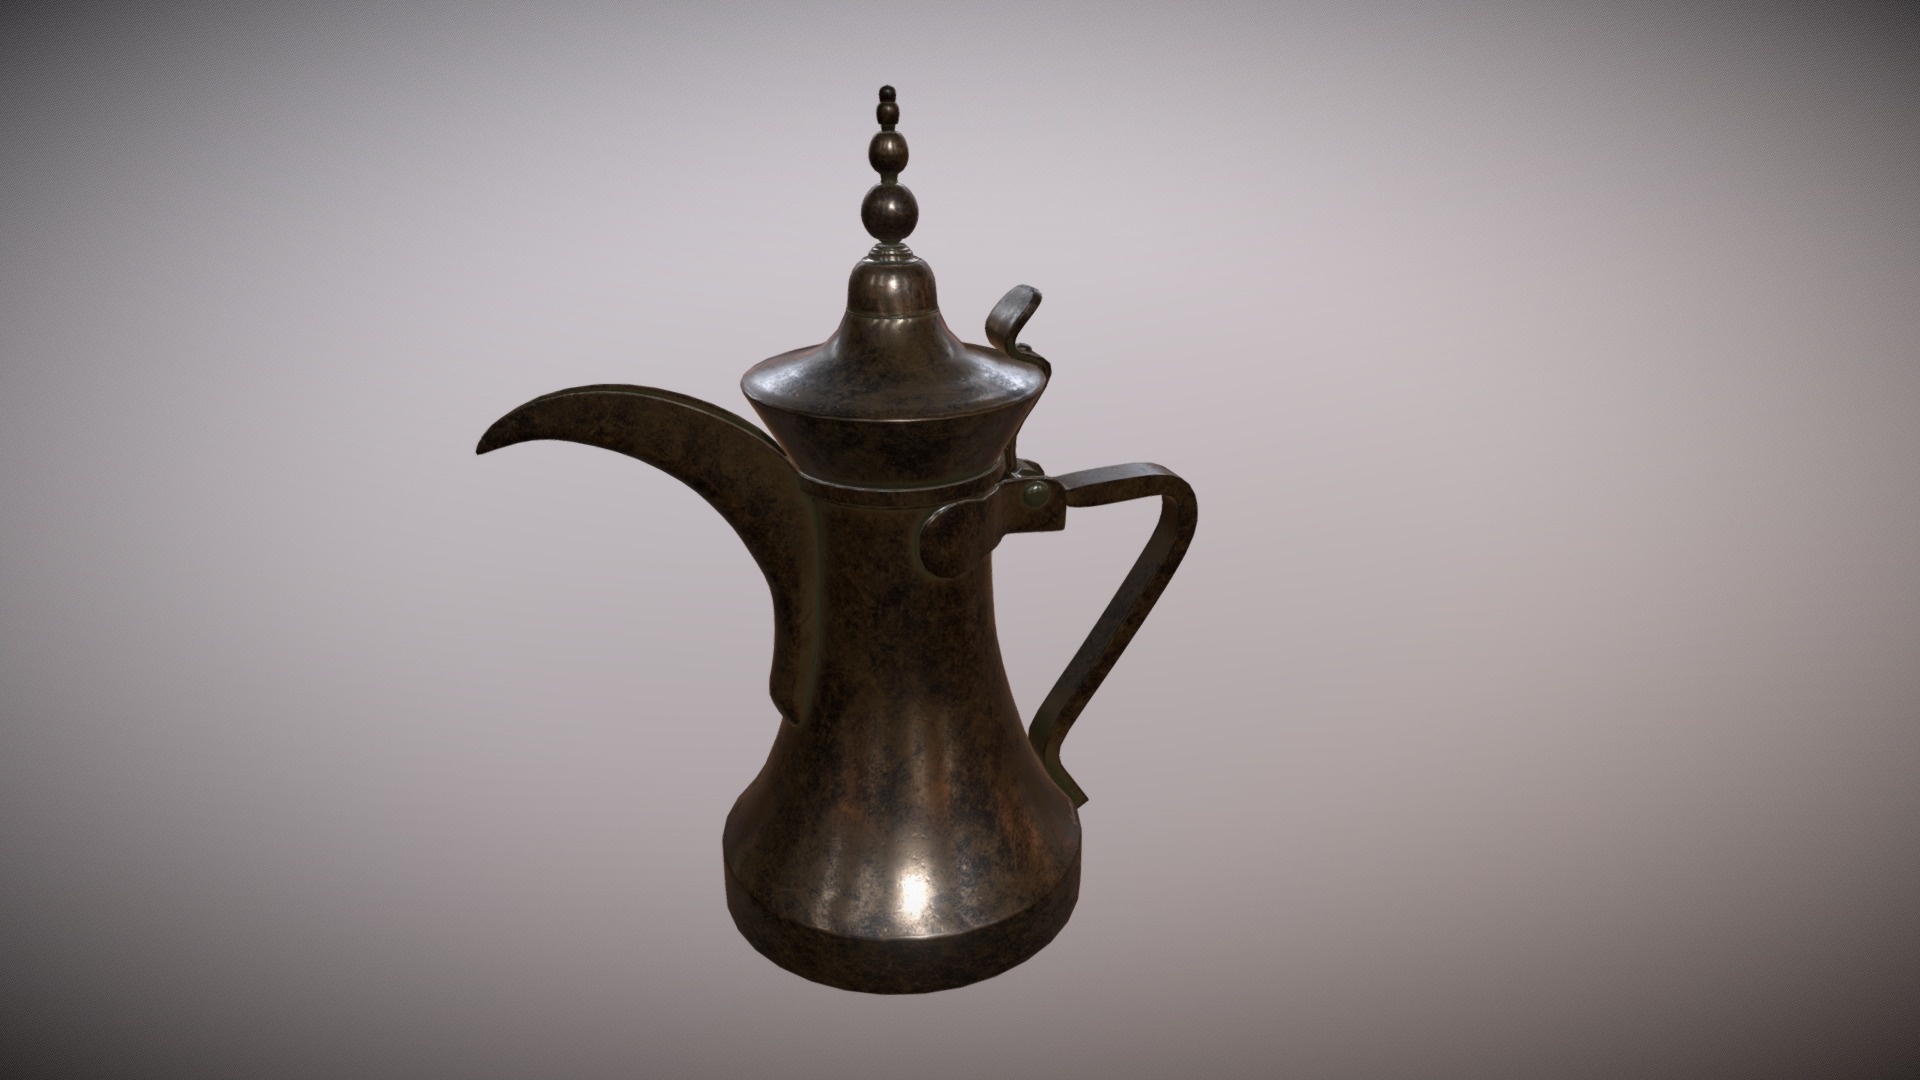 3D model ARAB DALLAH - This is a 3D model of the ARAB DALLAH. The 3D model is about a brass teapot on a white background.